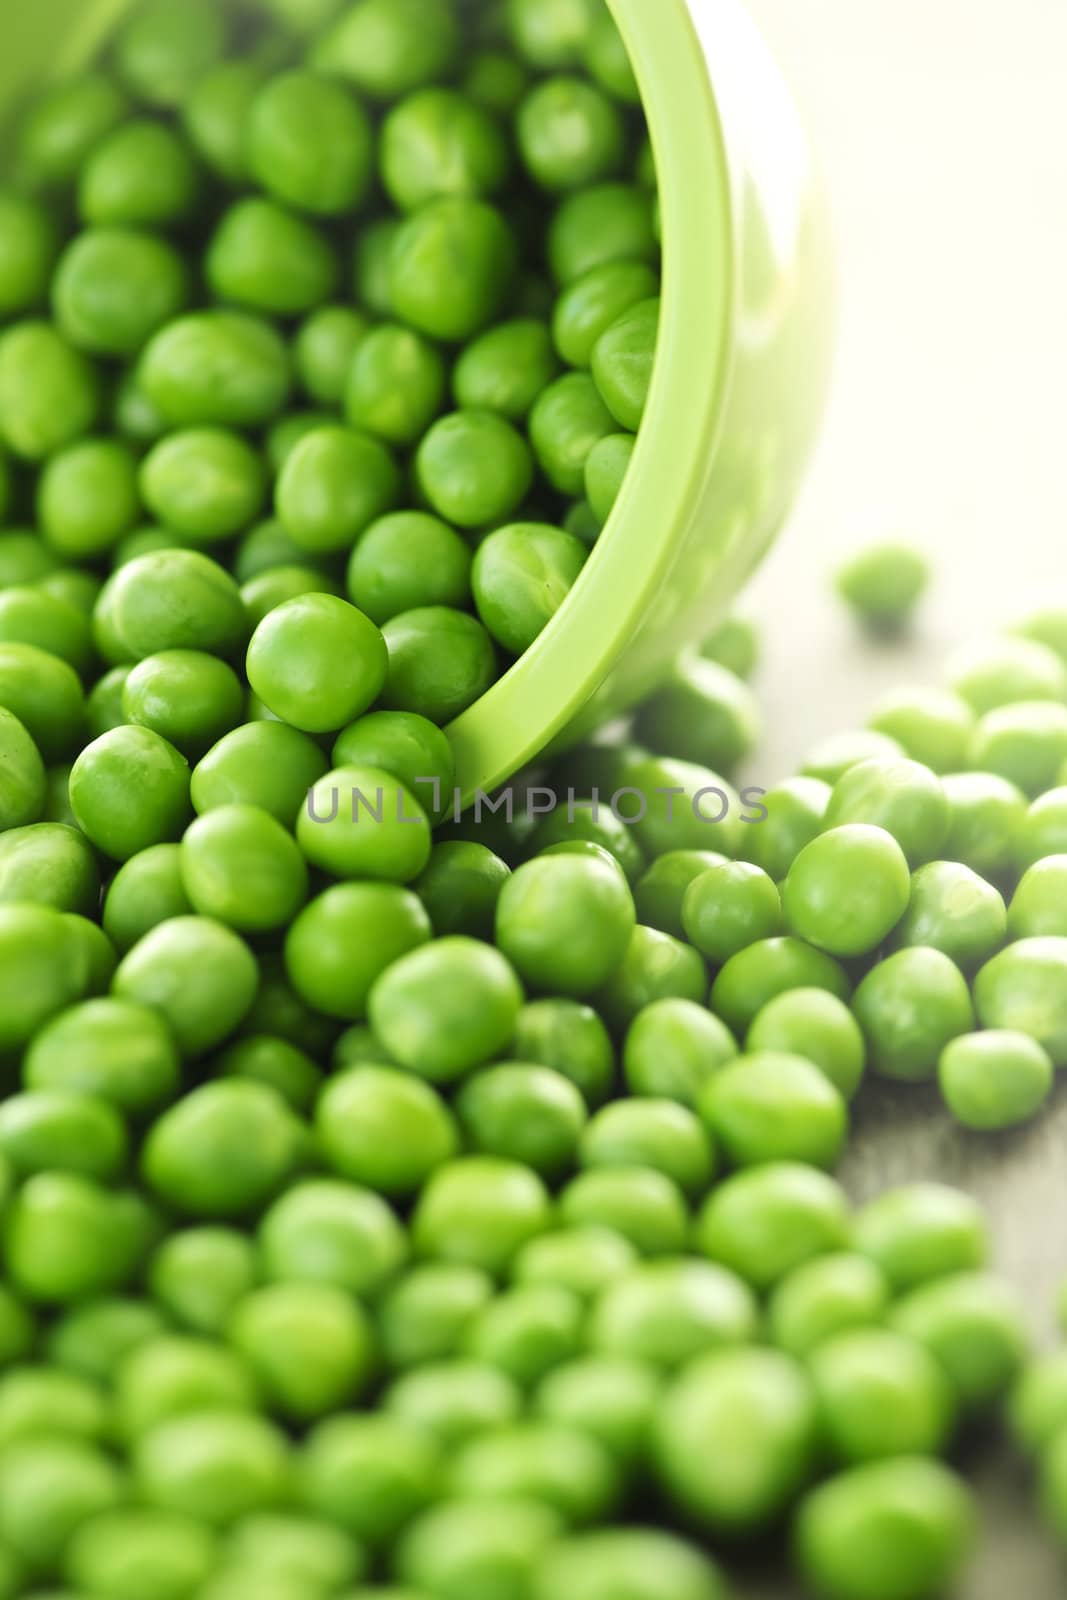 Spilled bowl of green peas by elenathewise